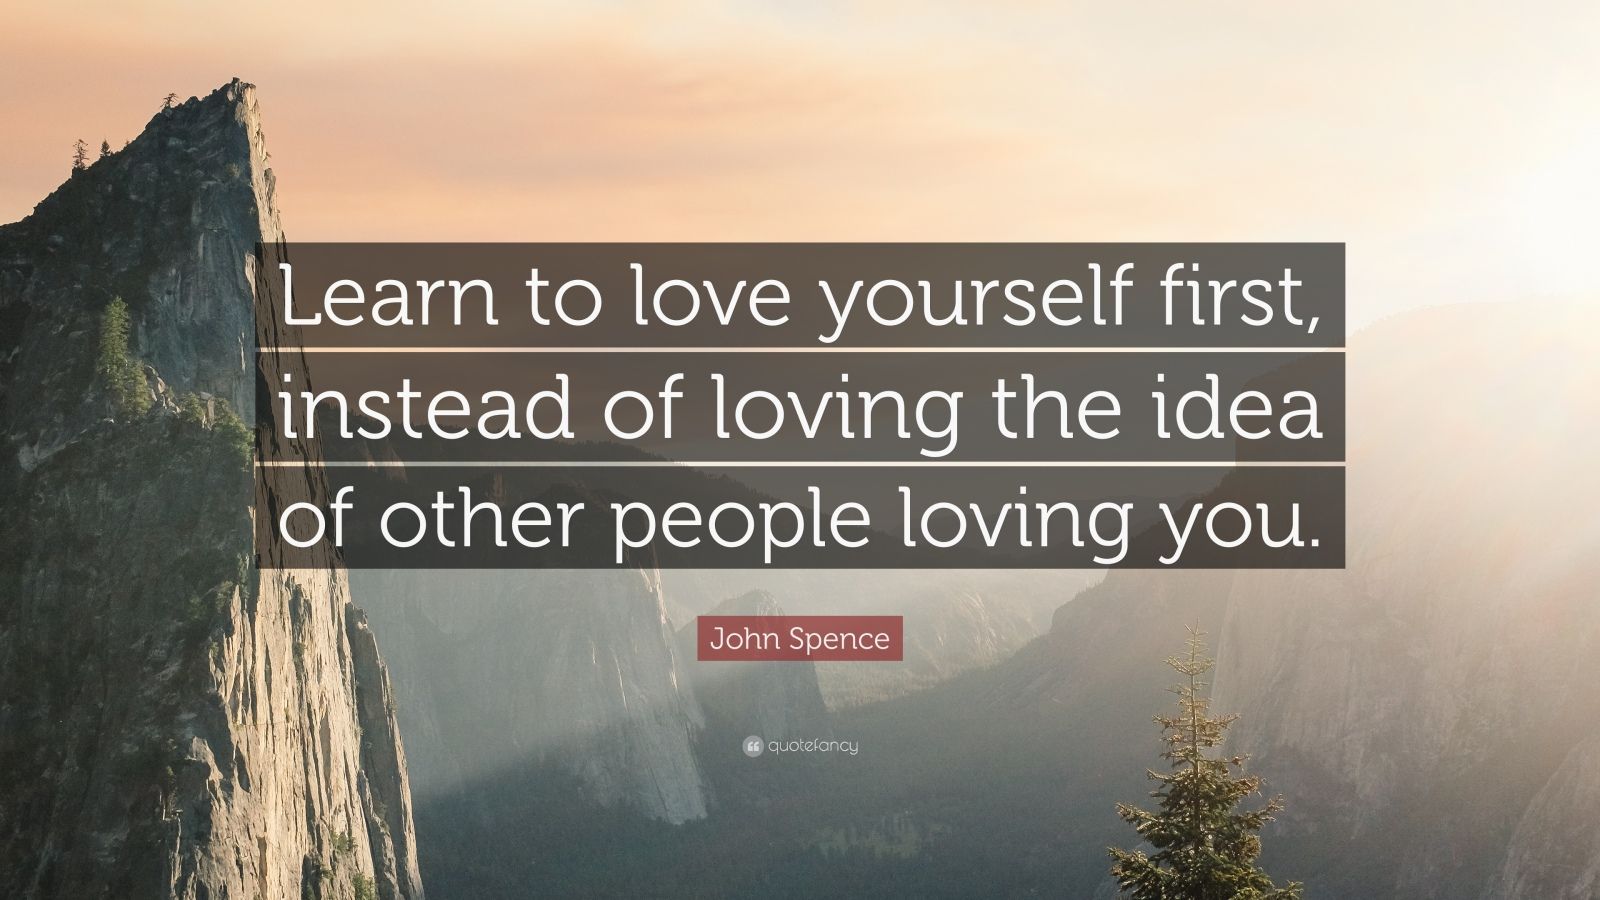 John Spence Quote: "Learn to love yourself first, instead of loving the idea of other people ...